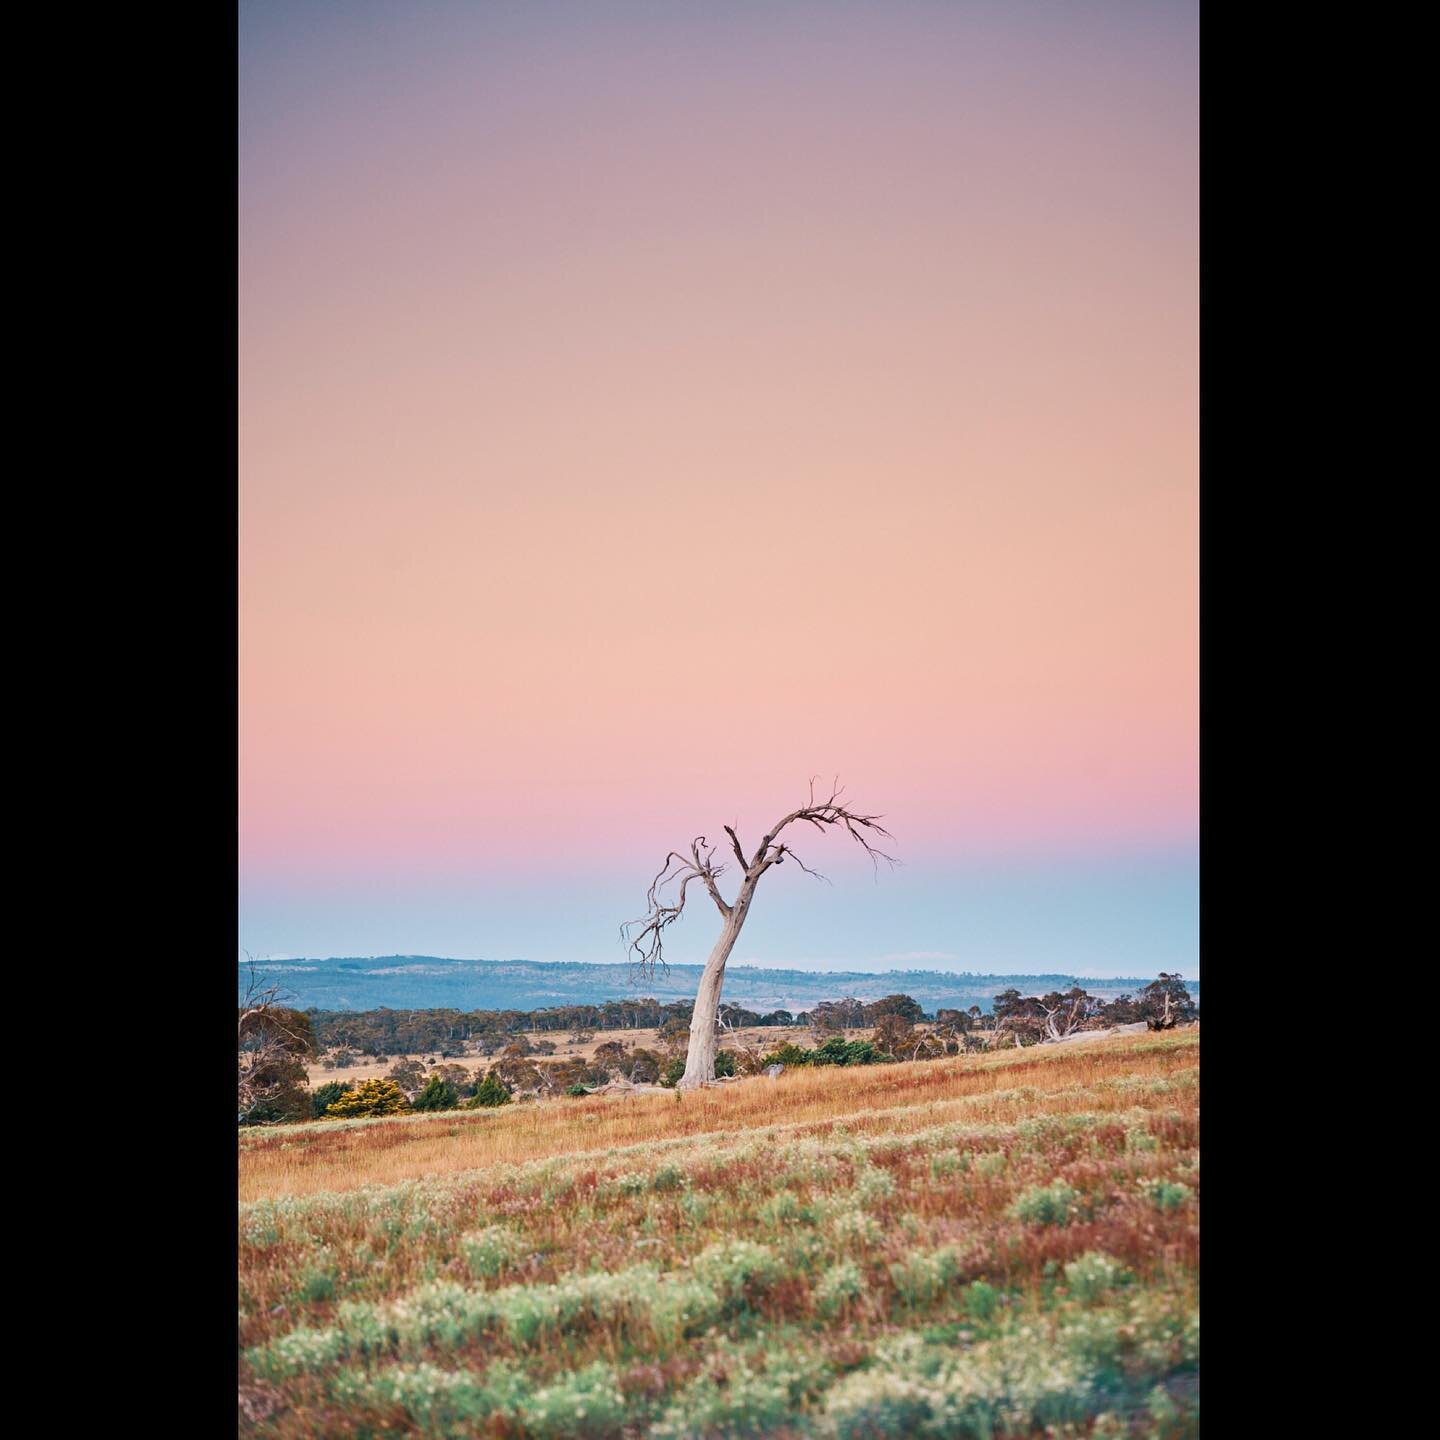 Went bush last week. The fire grounds have really struggled to regenerate, even after a wet Summer. Welcome to the new &lsquo;normal&rsquo; of climatic extremes.

#aussiebush #destinationNSW #sonya7riii @sonyaustralia #sonyawards #alphaawards #sony24